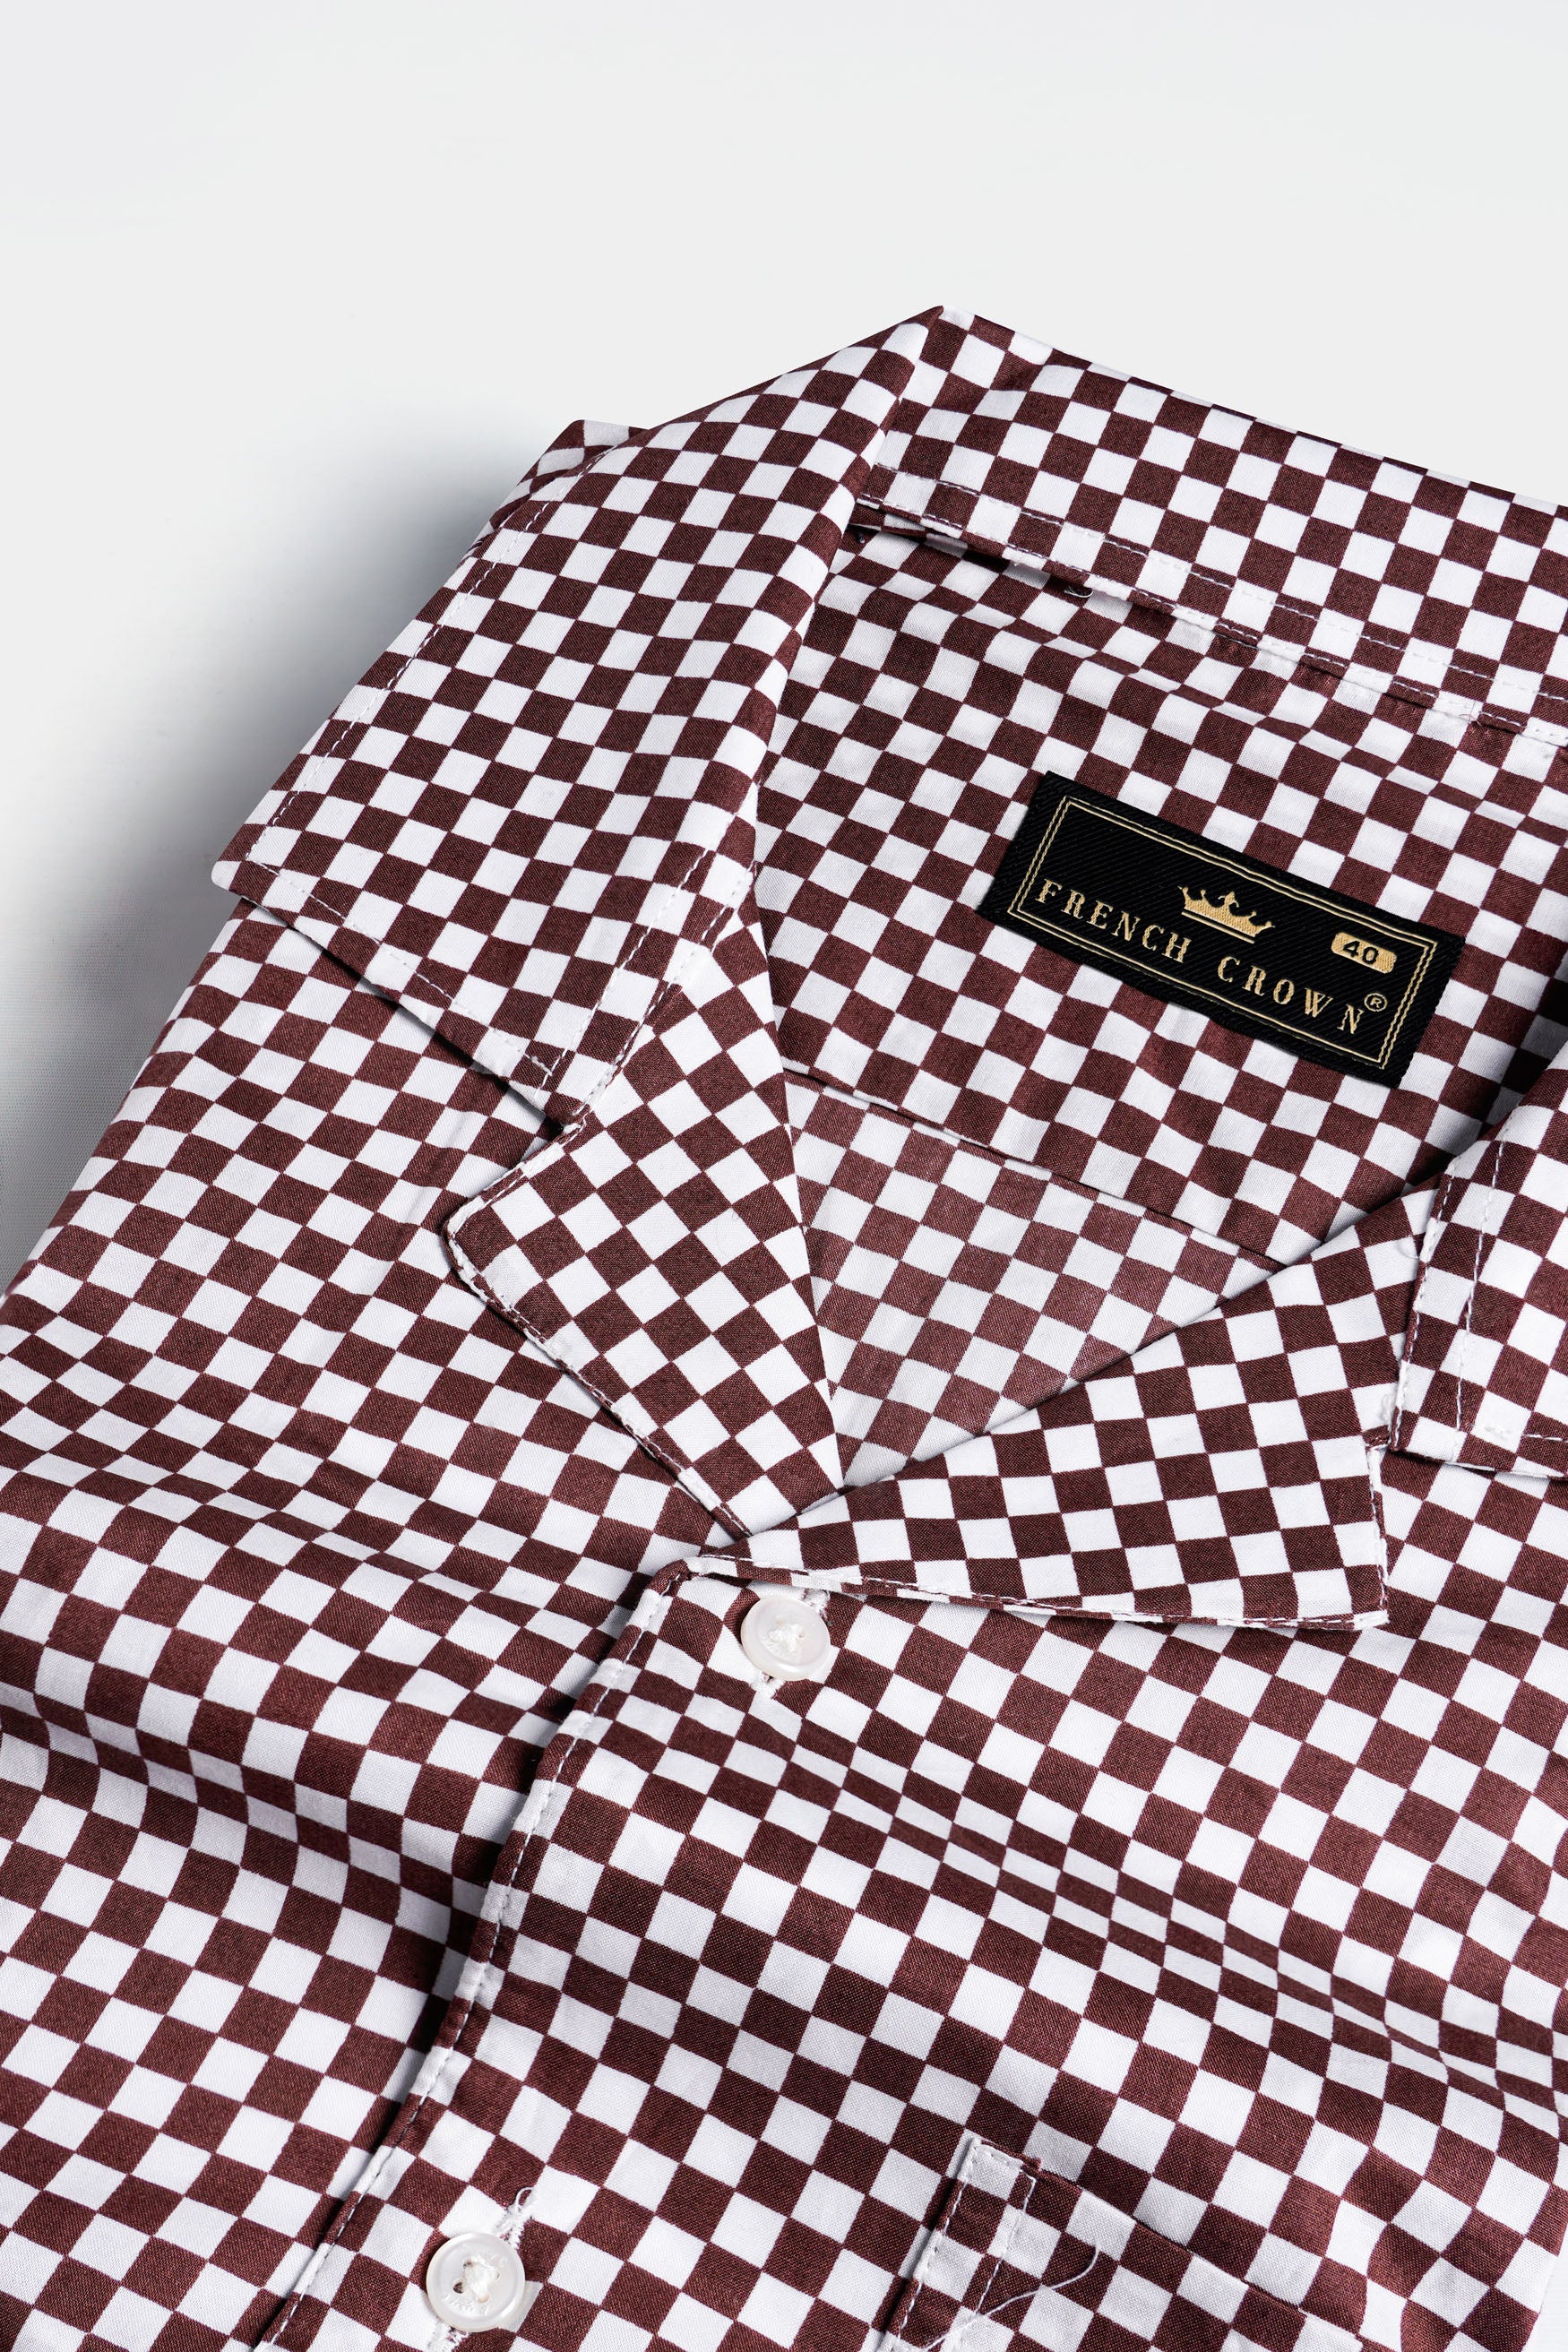 Crater Brown and White Checked Premium Cotton Shirt 11714-CC-SS-38, 11714-CC-SS-39, 11714-CC-SS-40, 11714-CC-SS-42, 11714-CC-SS-44, 11714-CC-SS-46, 11714-CC-SS-48, 11714-CC-SS-50, 11714-CC-SS-52